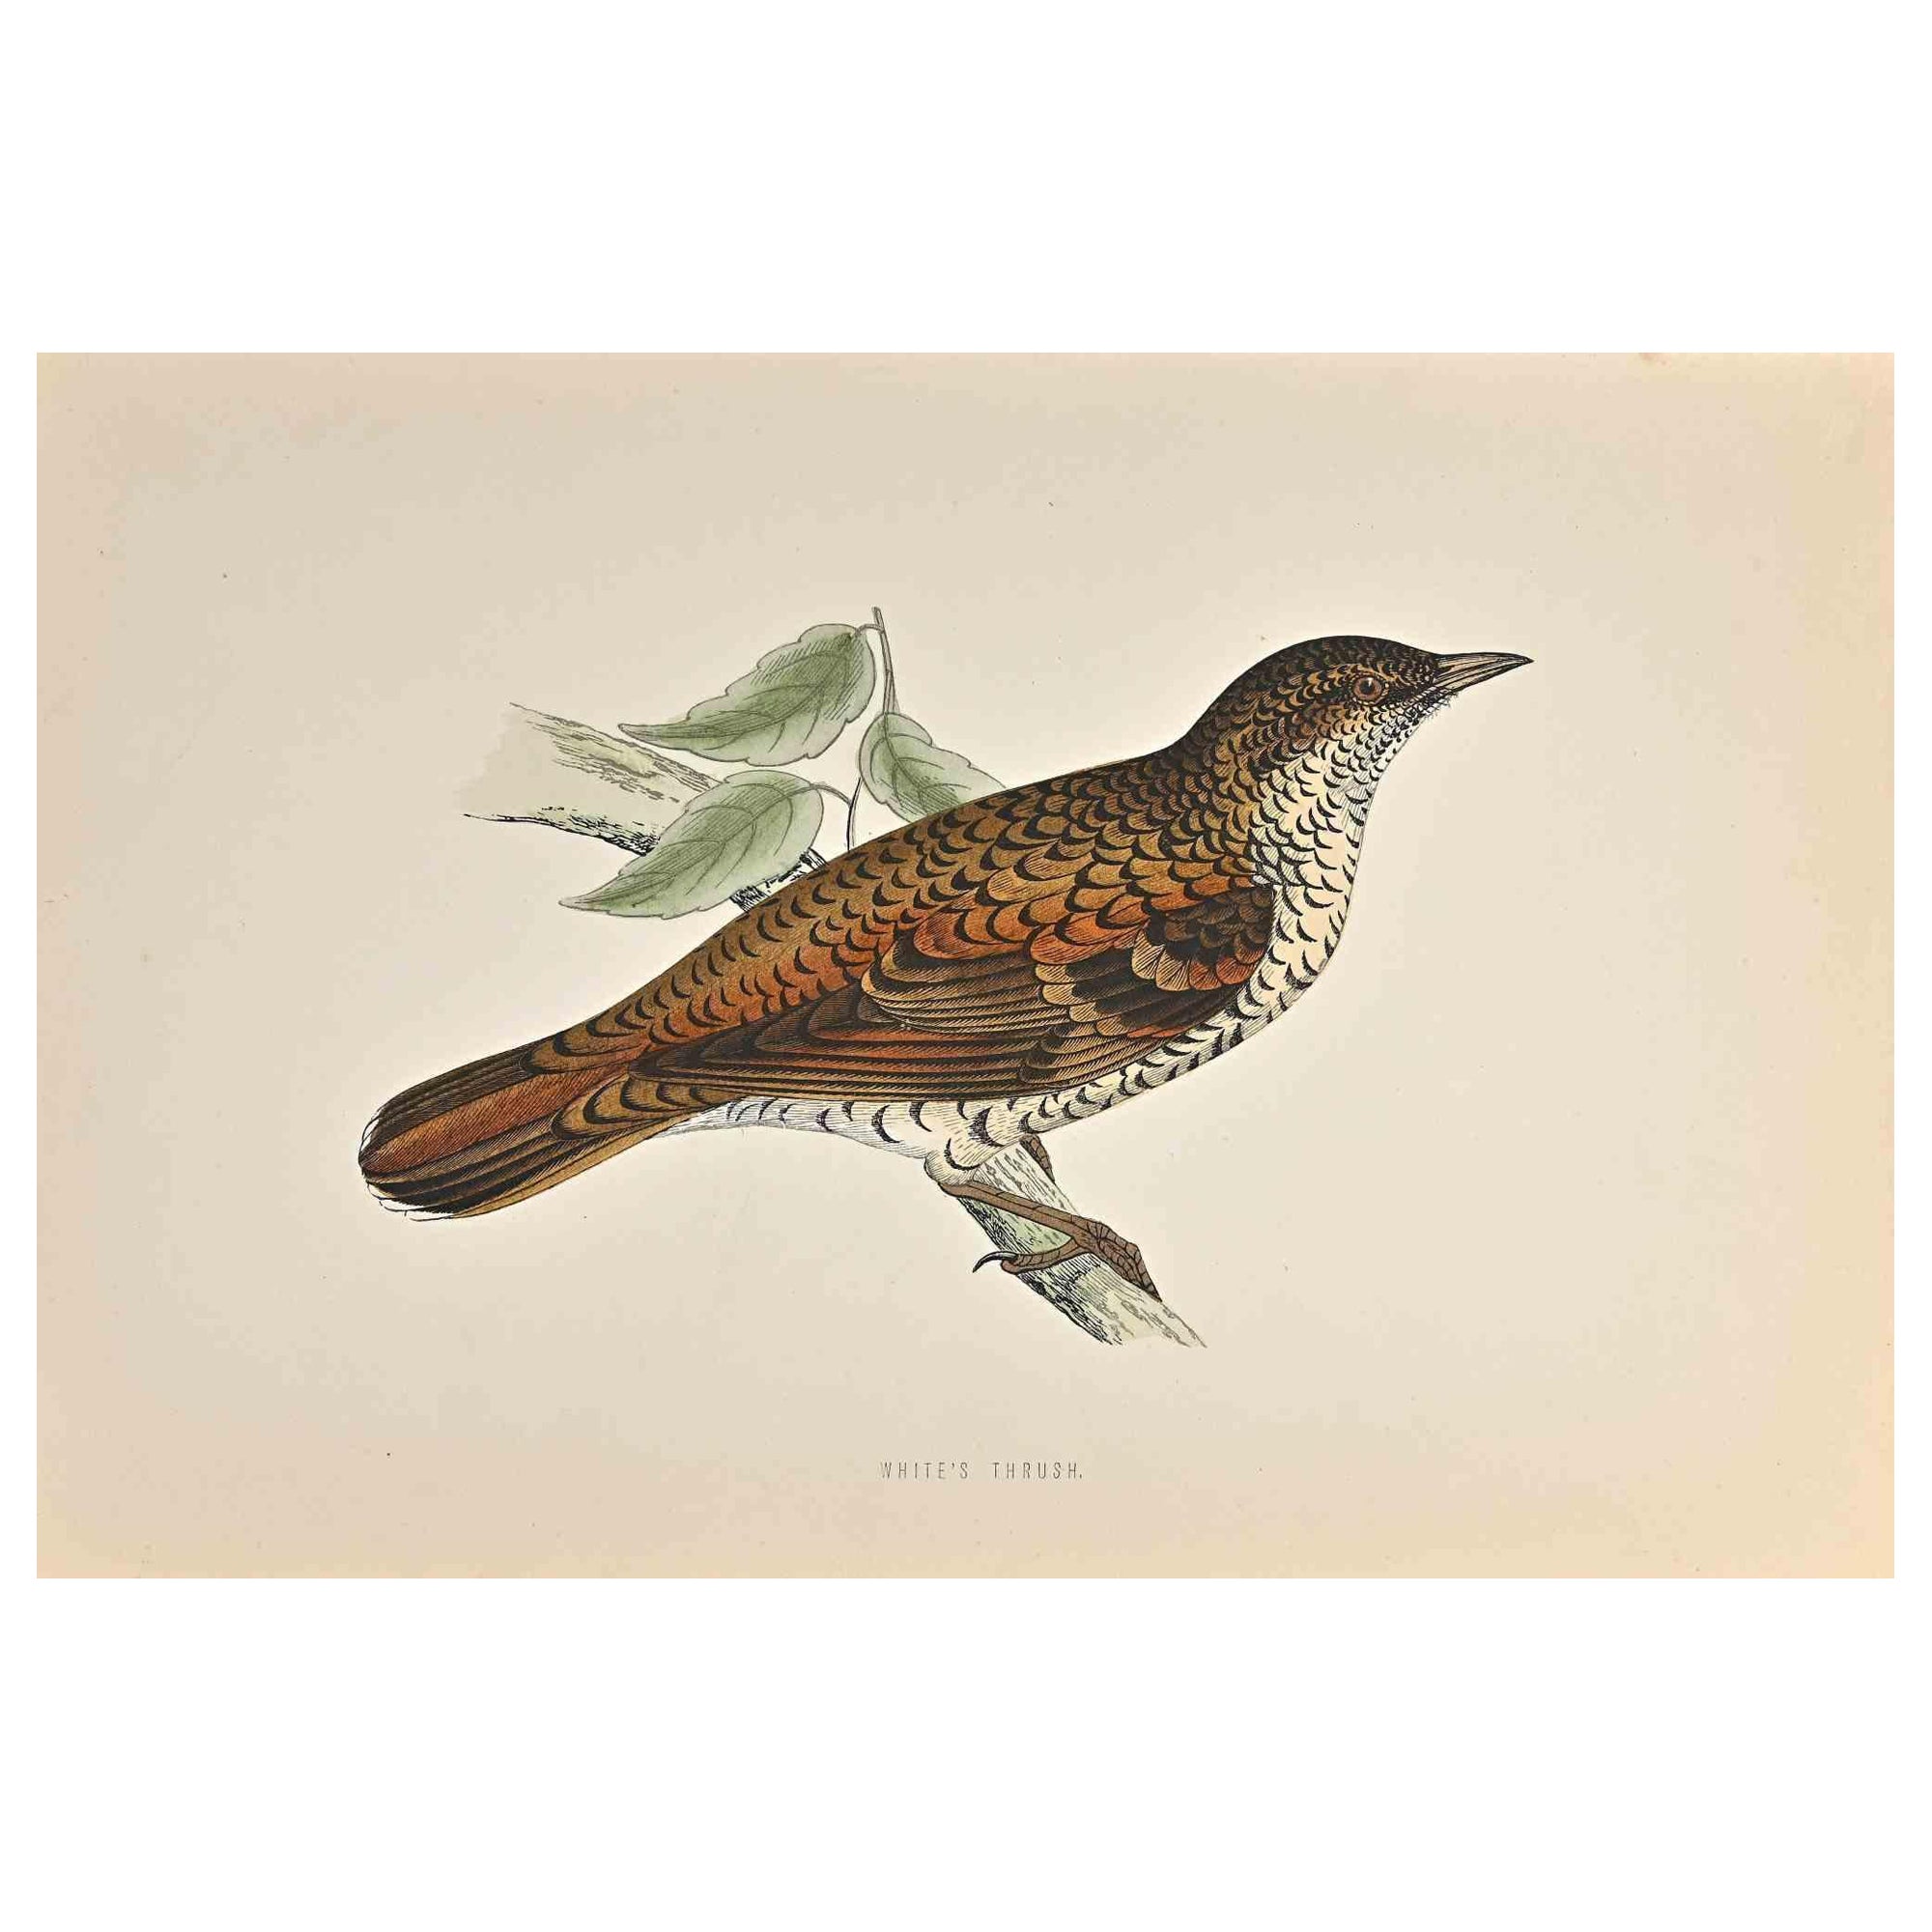 White's Thrush is a modern artwork realized in 1870 by the British artist Alexander Francis Lydon (1836-1917) . 

Woodcut print, hand colored, published by London, Bell & Sons, 1870.  Name of the bird printed in plate. This work is part of a print